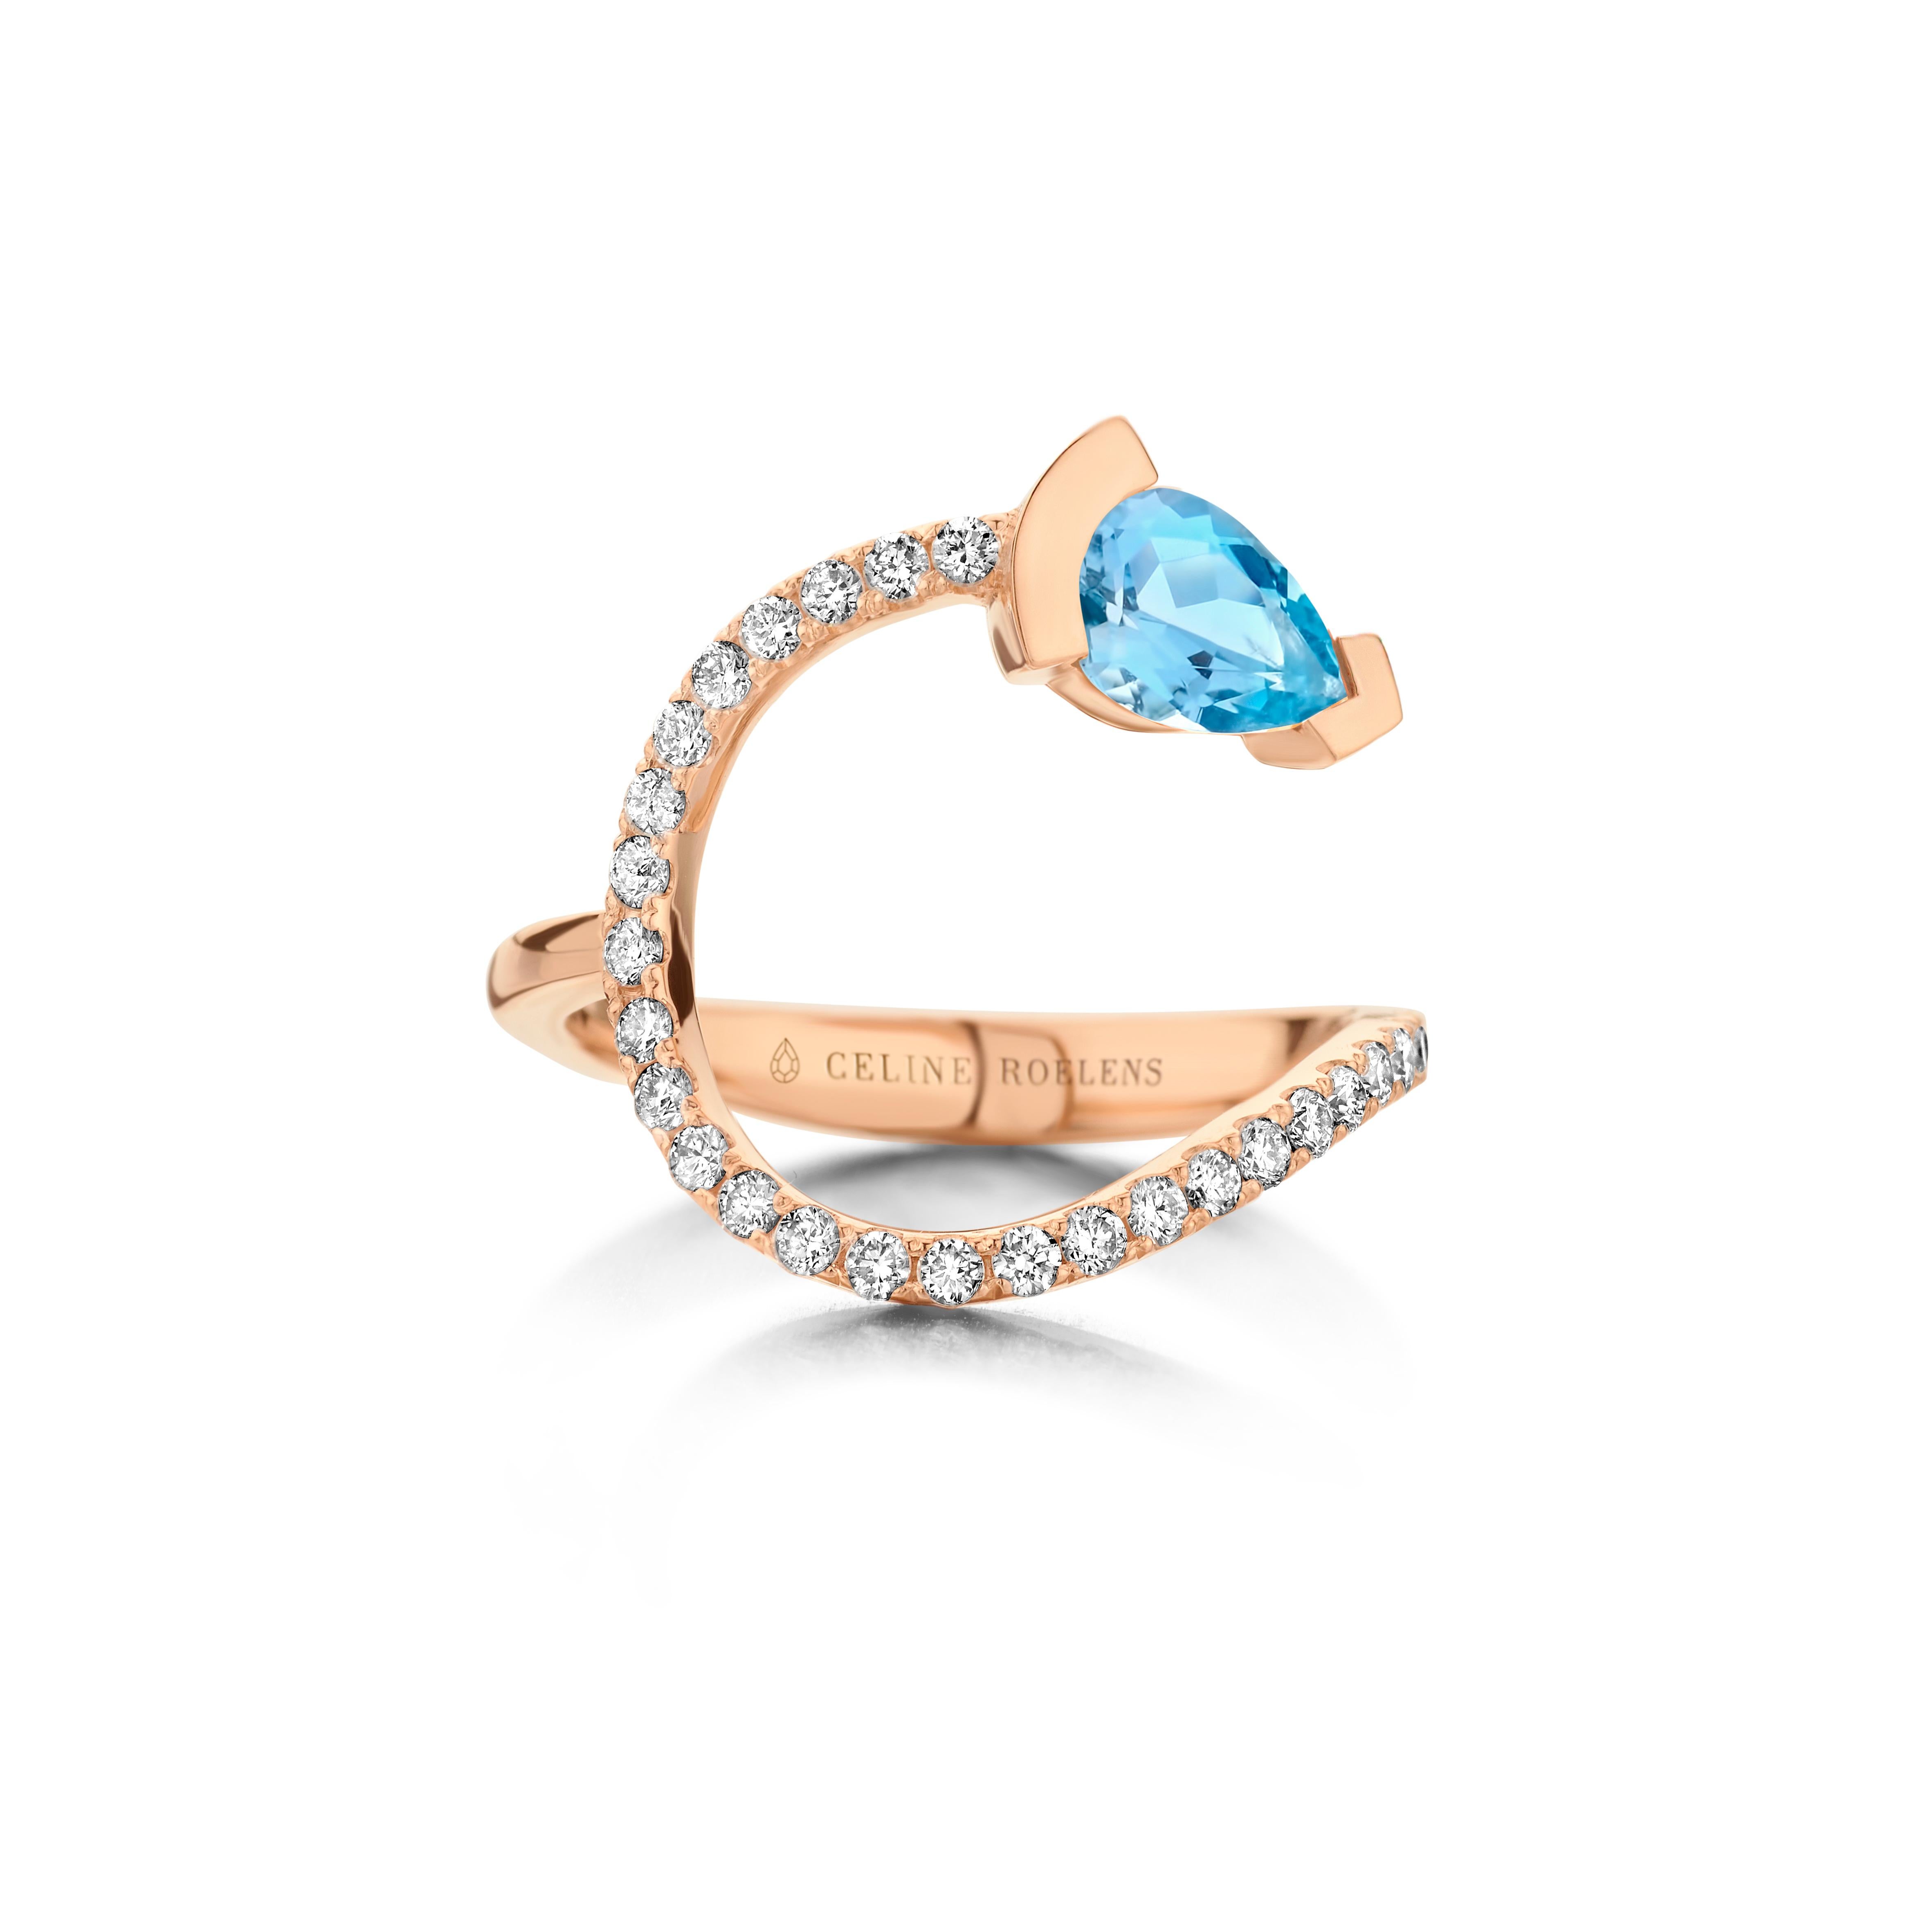 ADELINE curved ring in 18Kt yellow gold set with a pear shaped Aquamarine and 0,33 Ct of white brilliant cut diamonds - VS F quality.